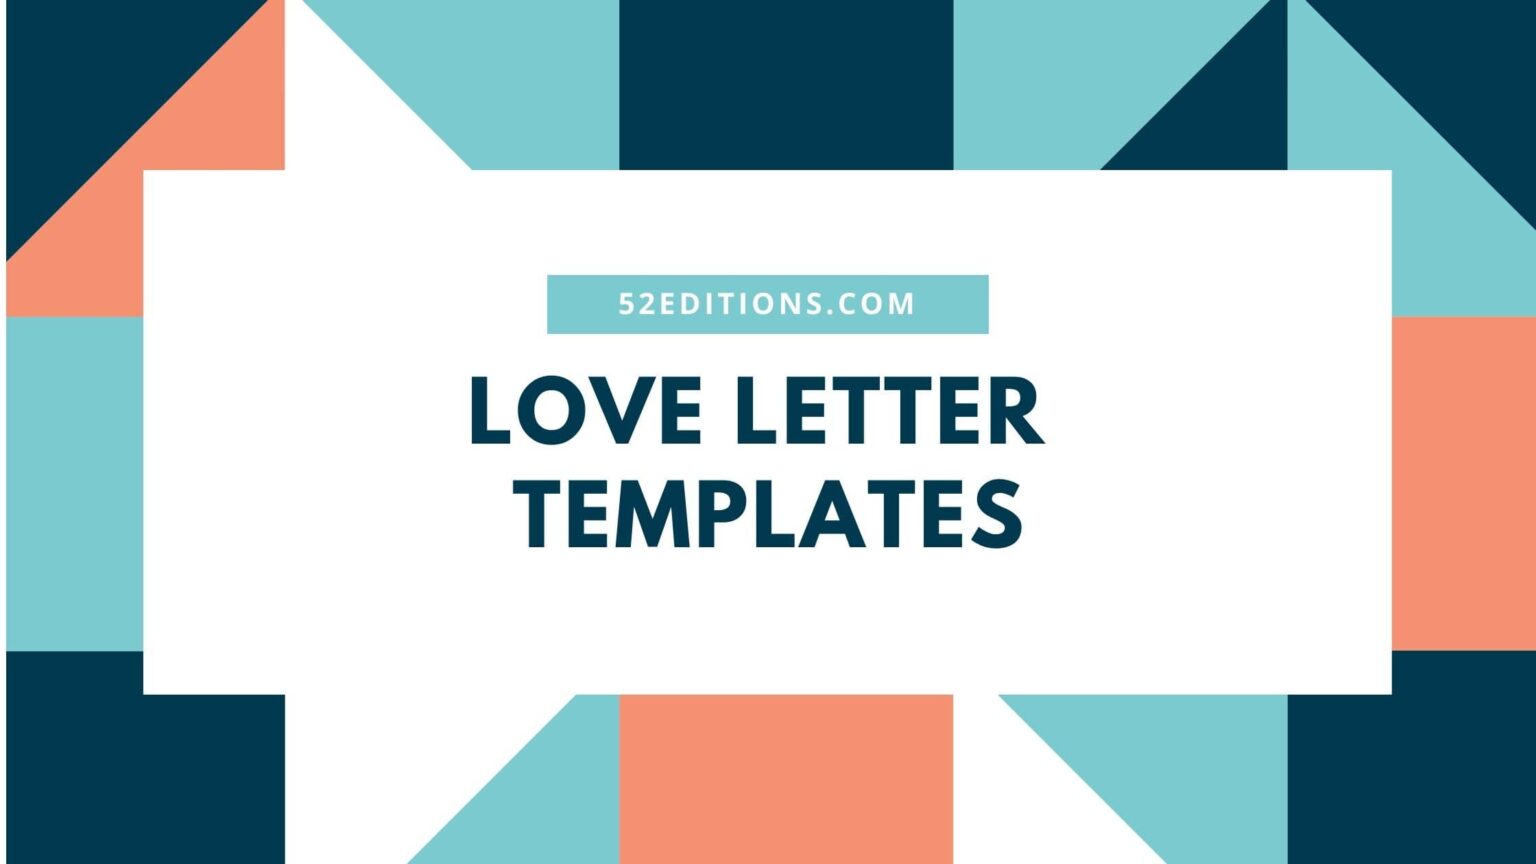 Love Letter Templates // Get FREE Letter Templates (Print or Download)